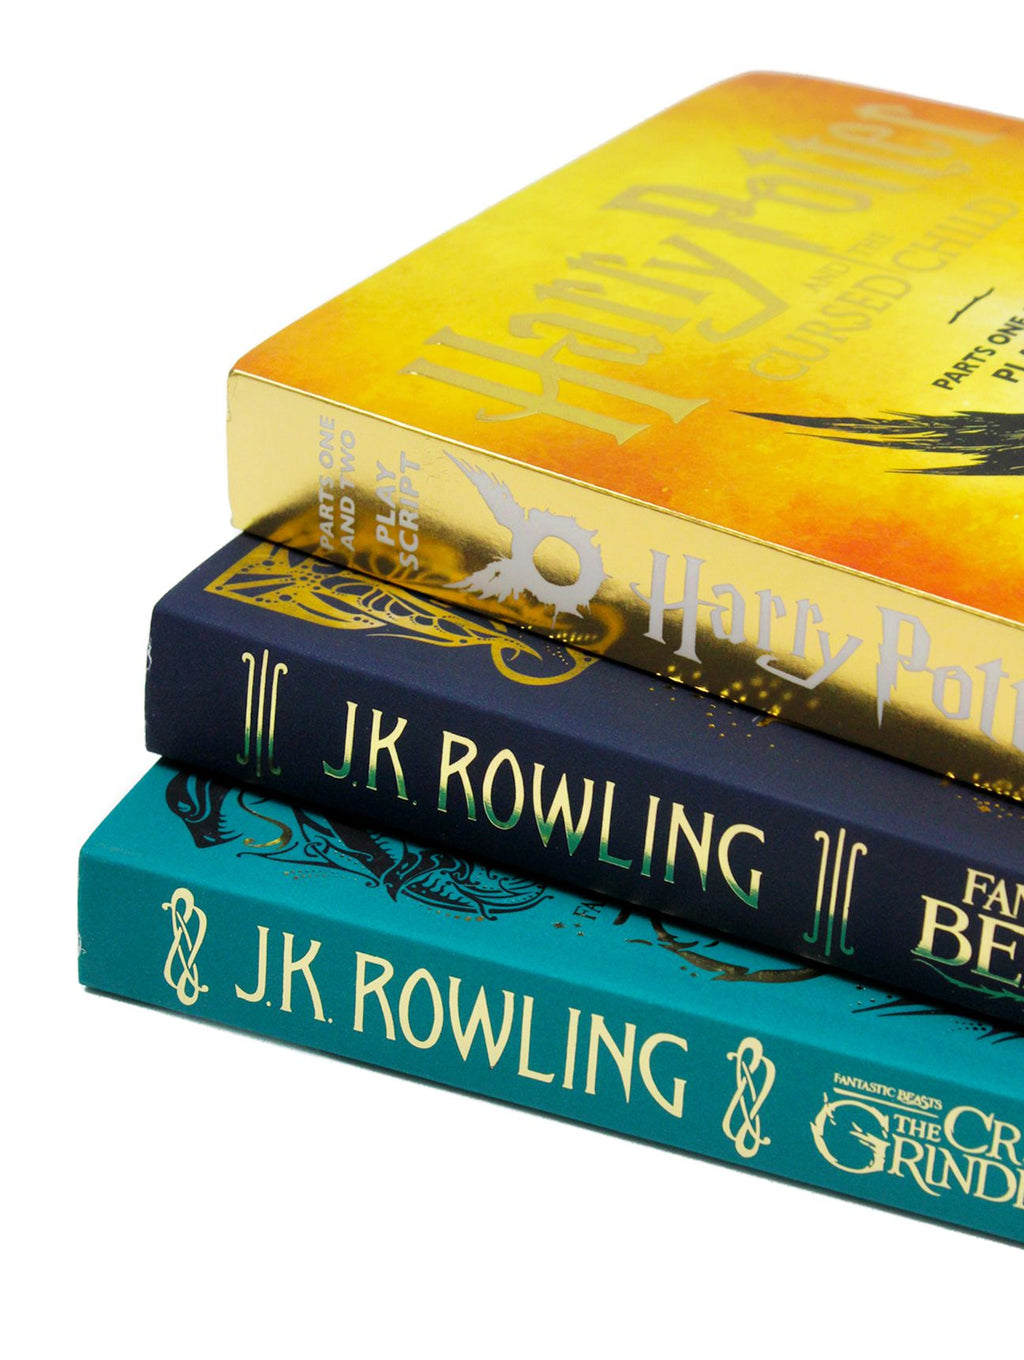 J.K Rowling The Hogwarts Library 3 Books Box Set Collection